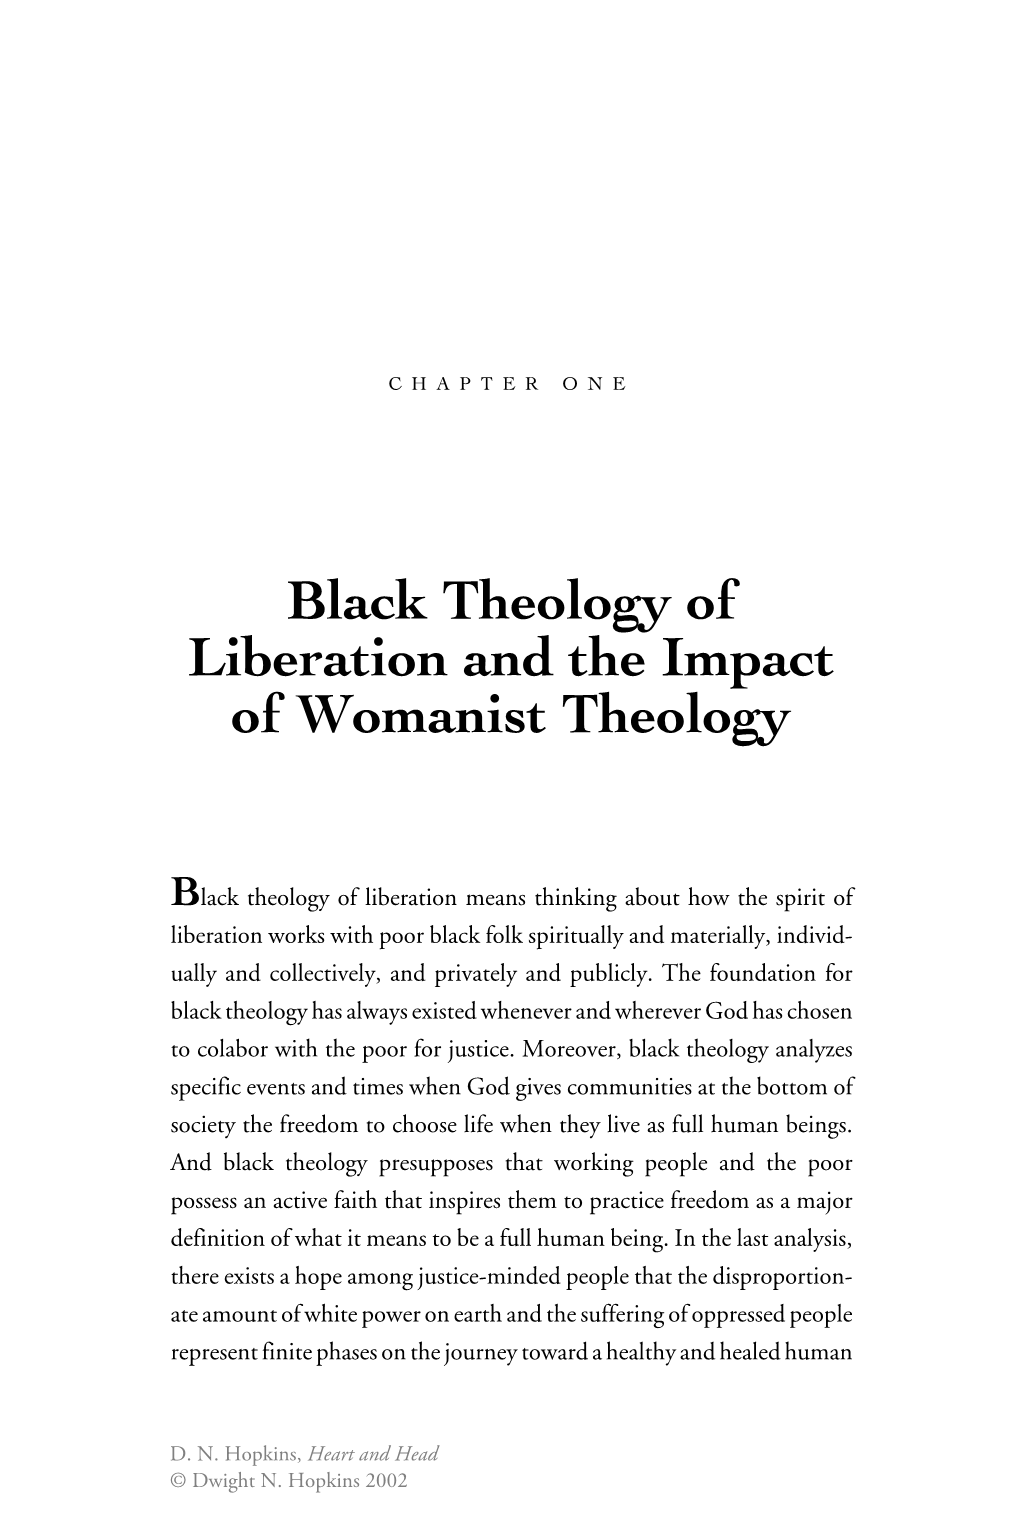 Black Theology of Liberation and the Impact of Womanist Theology